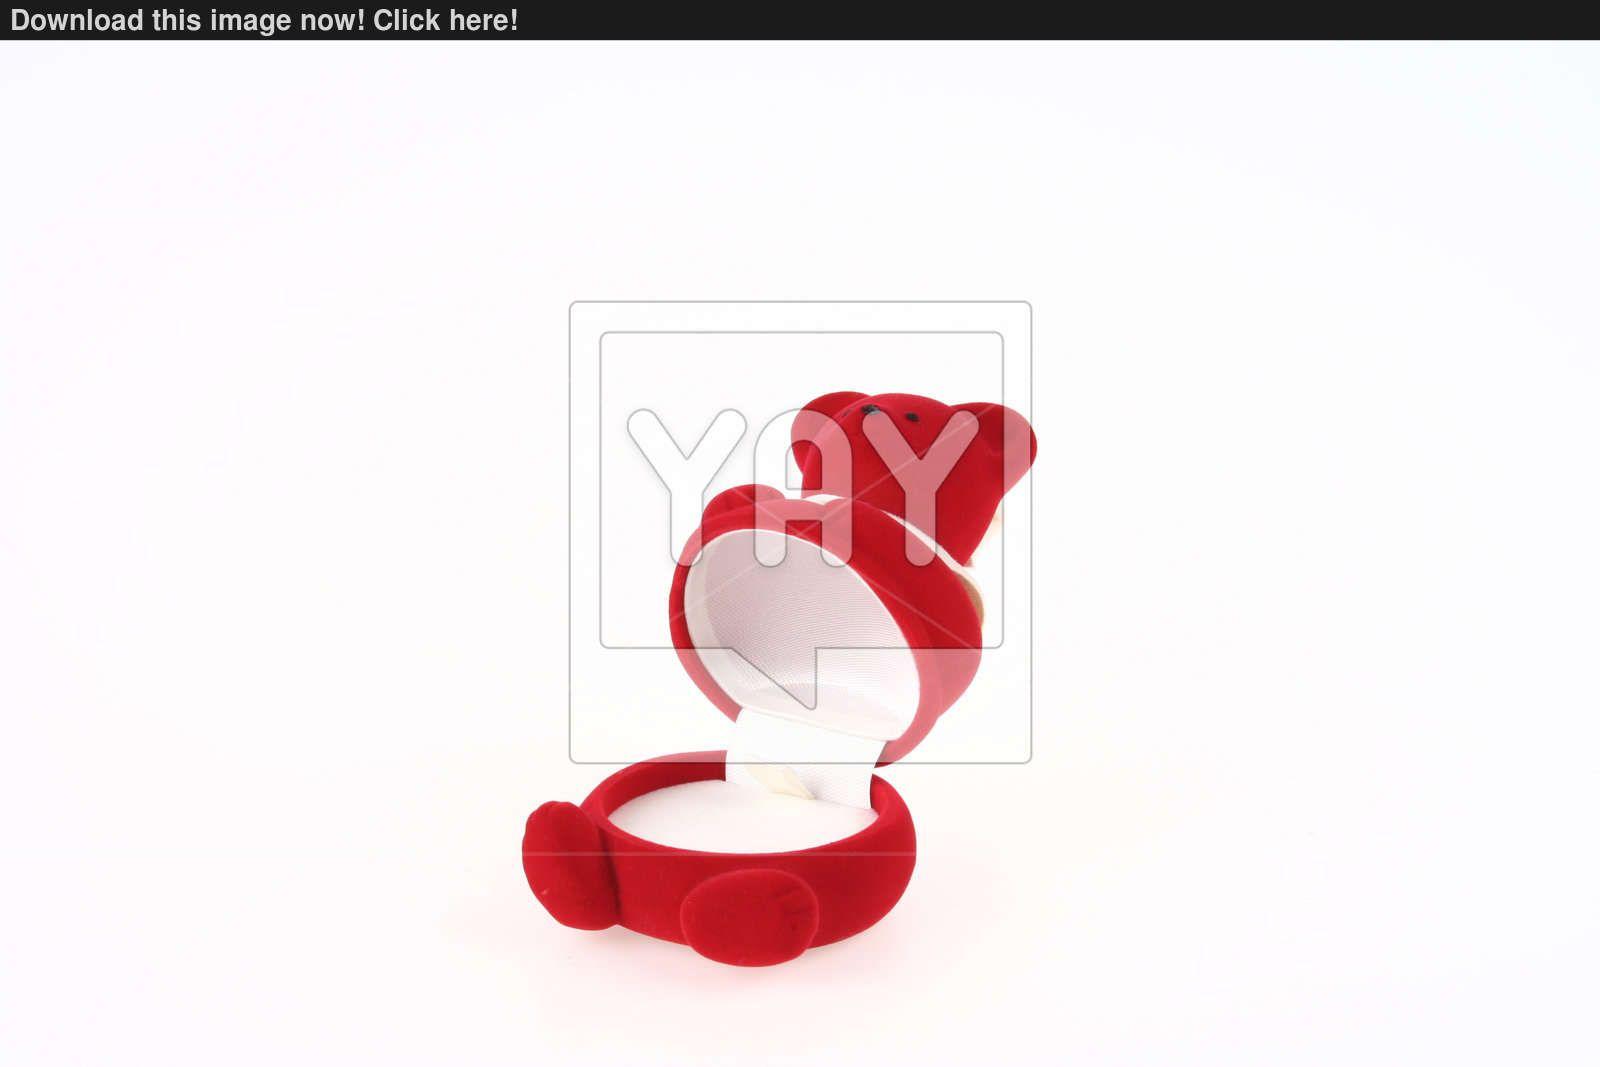 Empty Red Boxes Logo - Opened Empty Red Bear Ring Box image